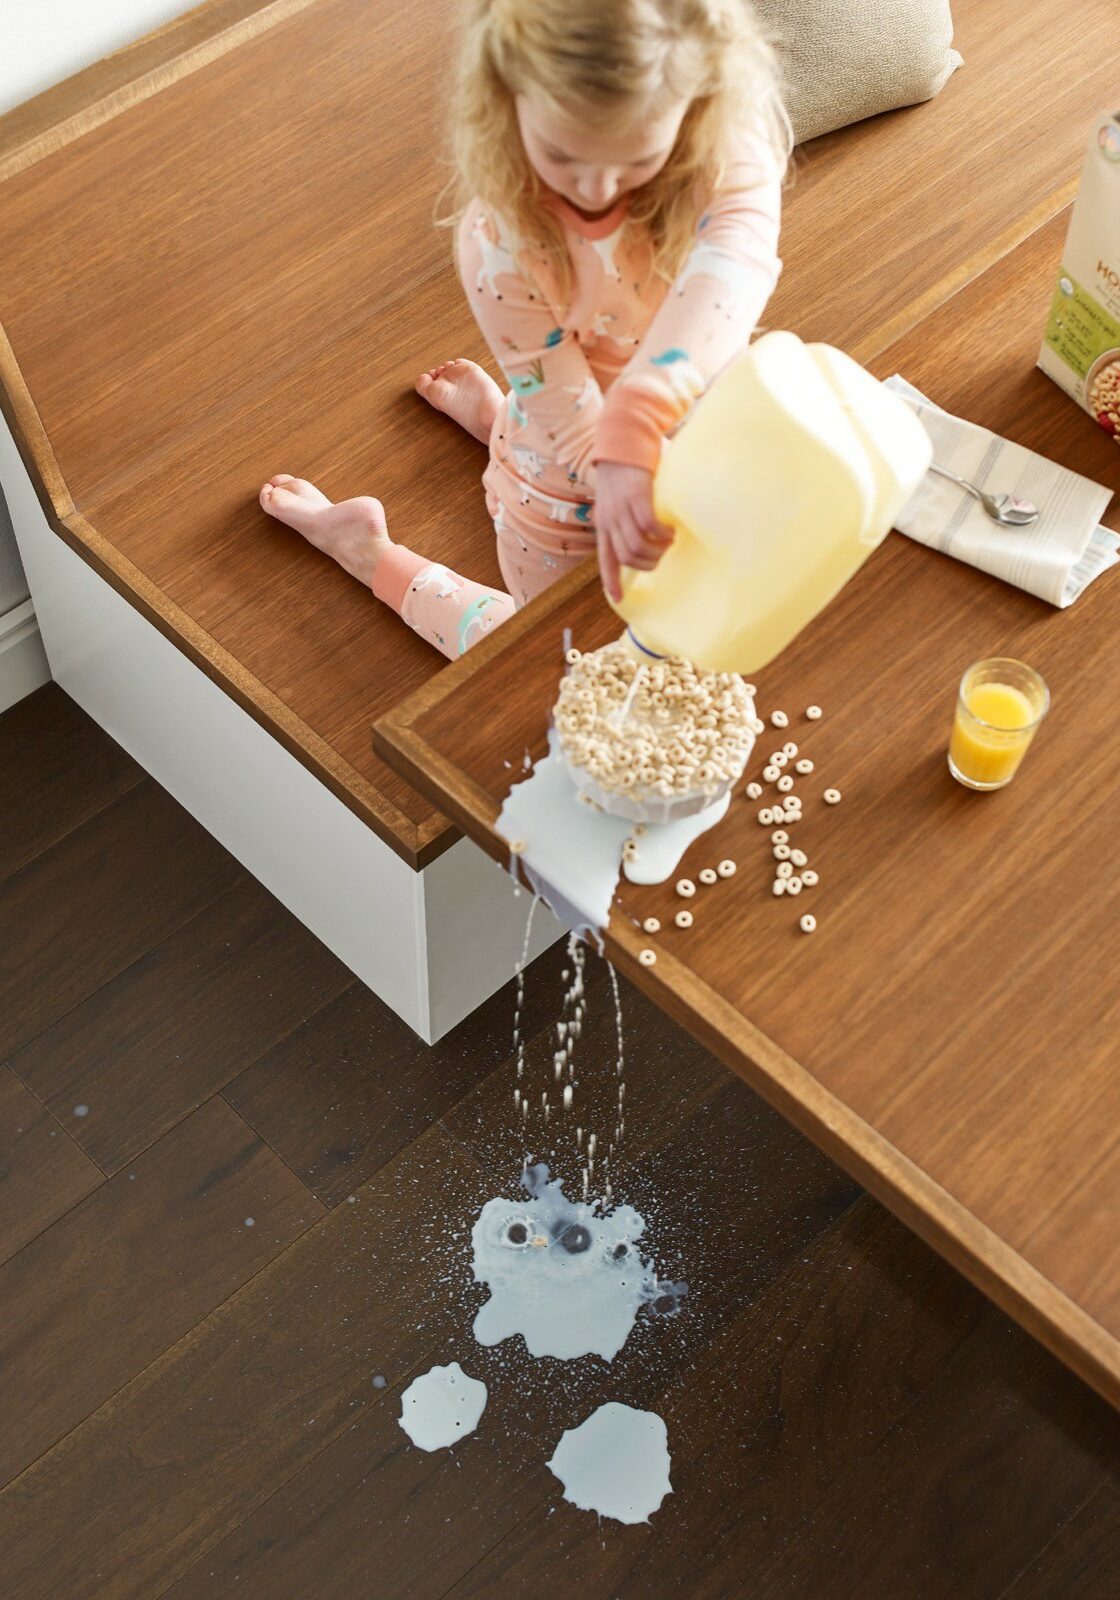 Milk spill cleaning | Nationwide Floor & Window Coverings